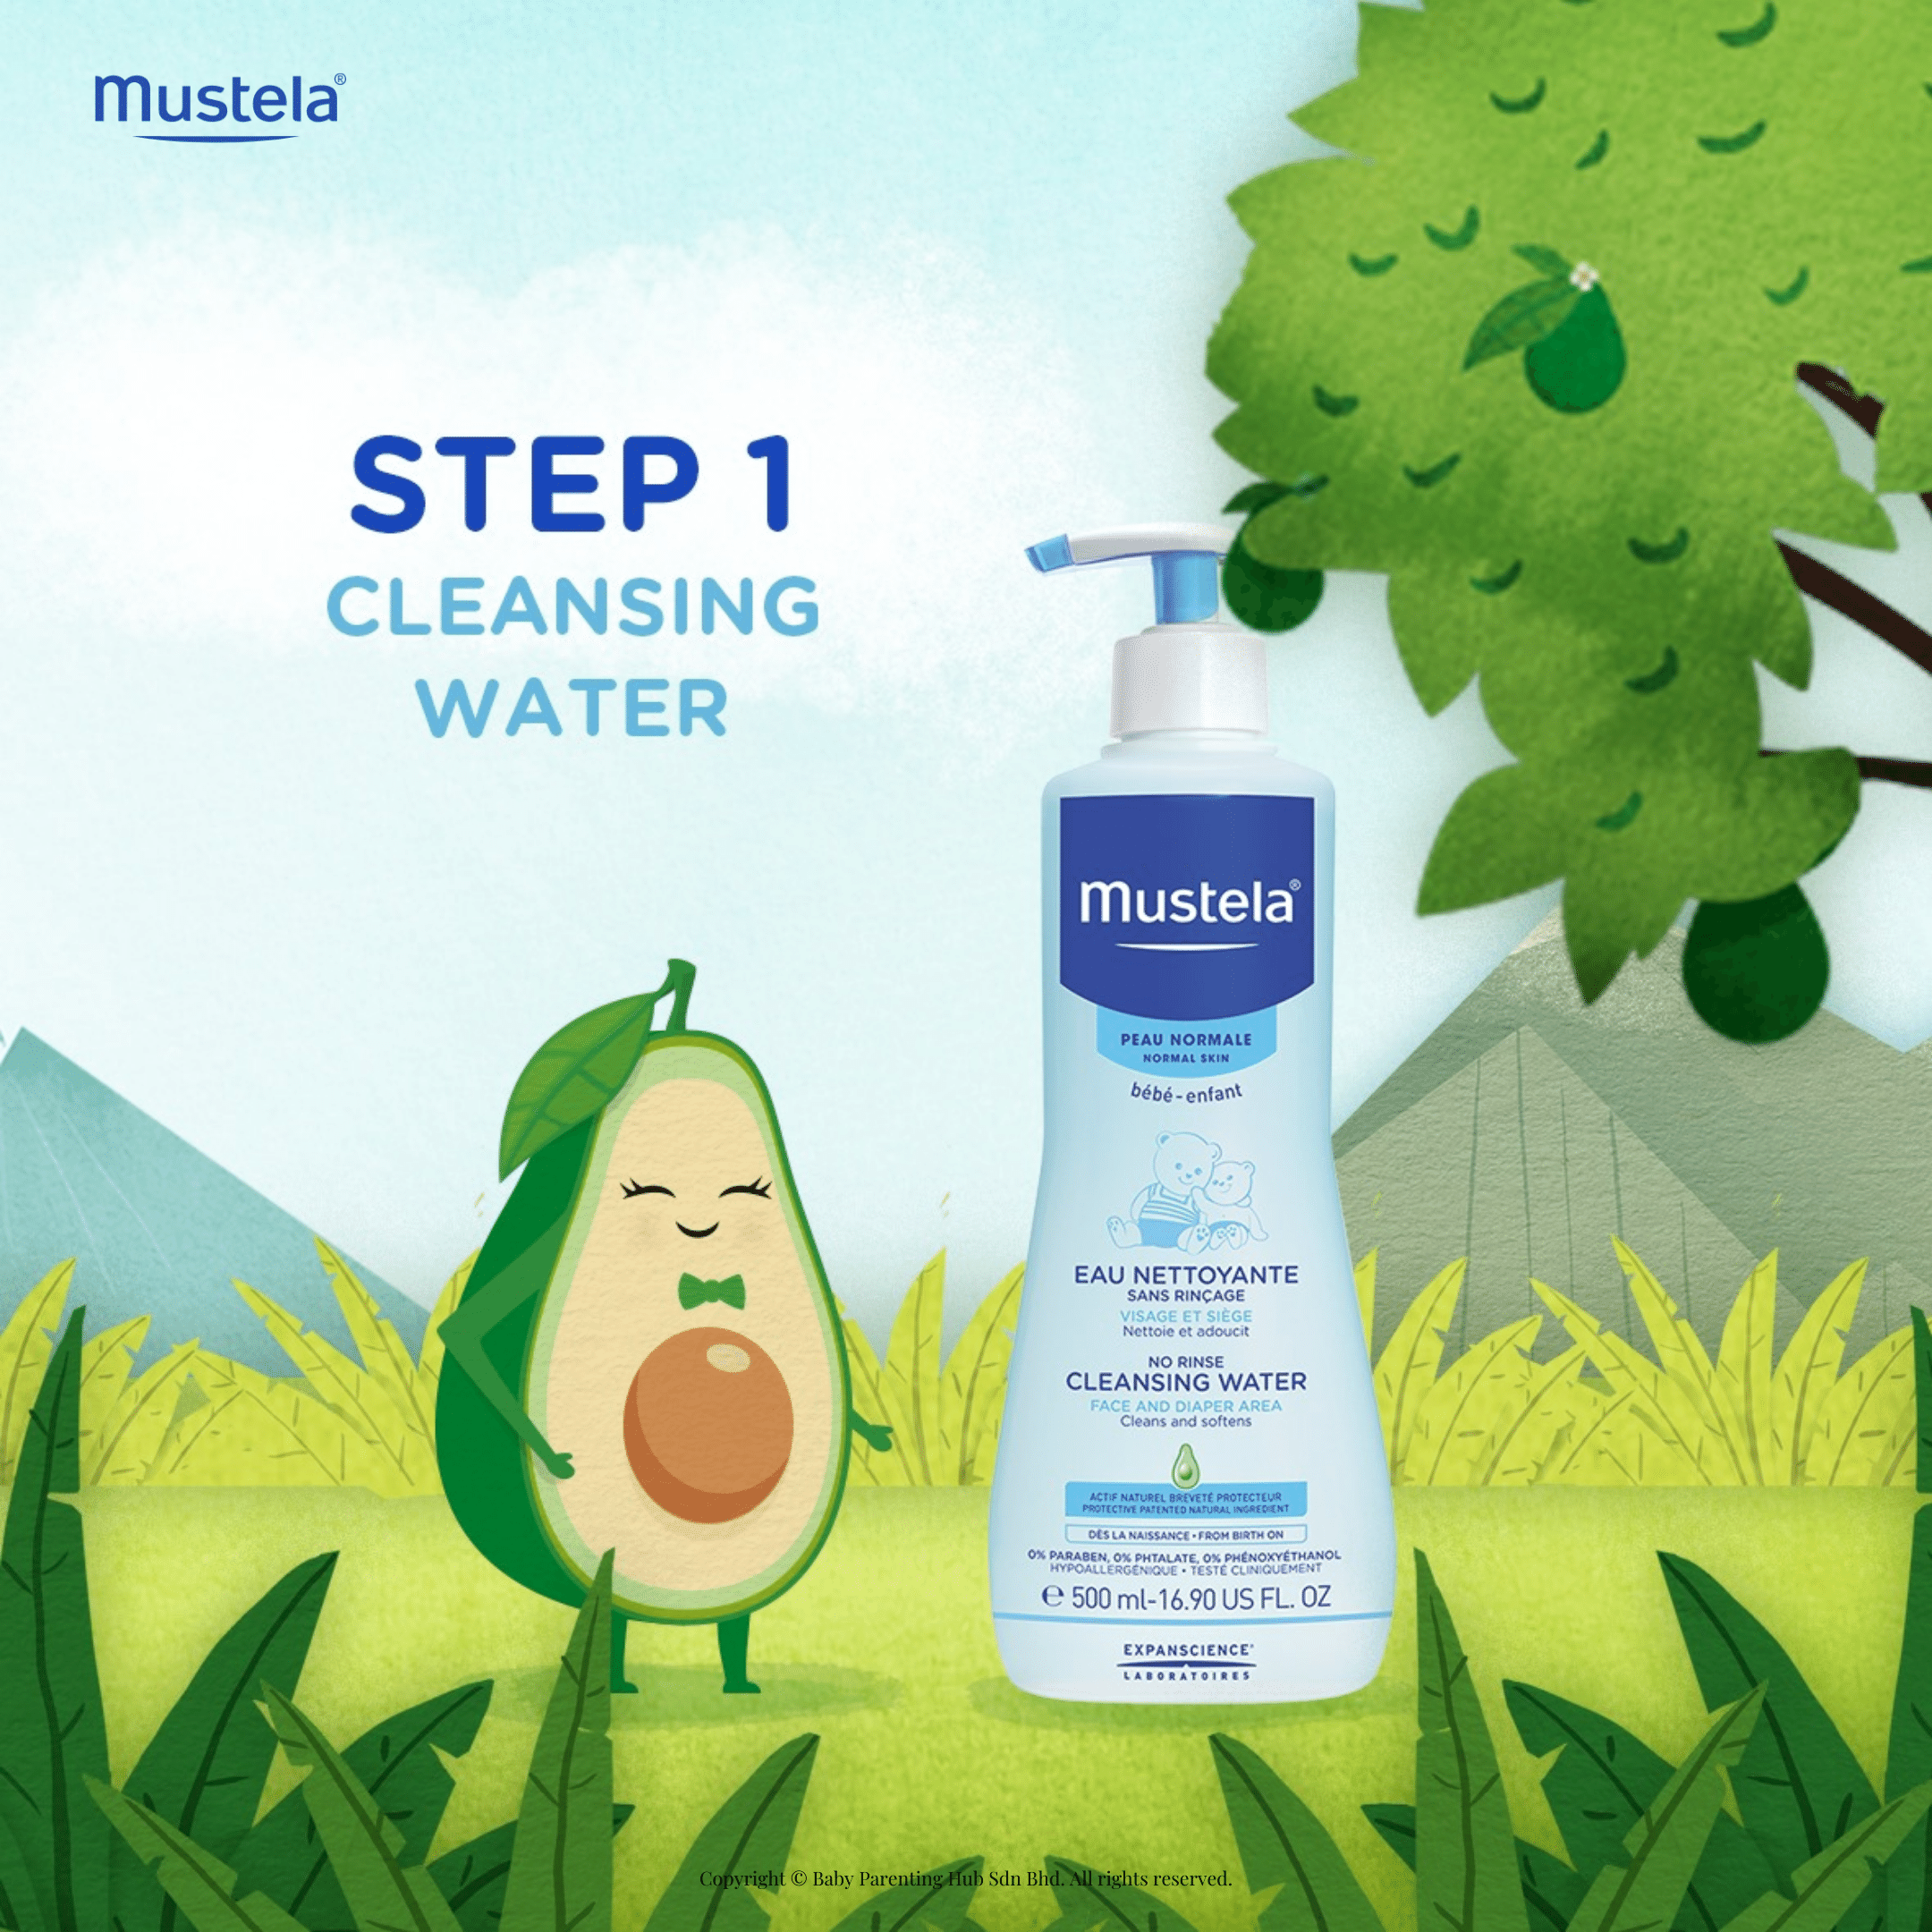 No-rinse baby Cleansing water with avocado